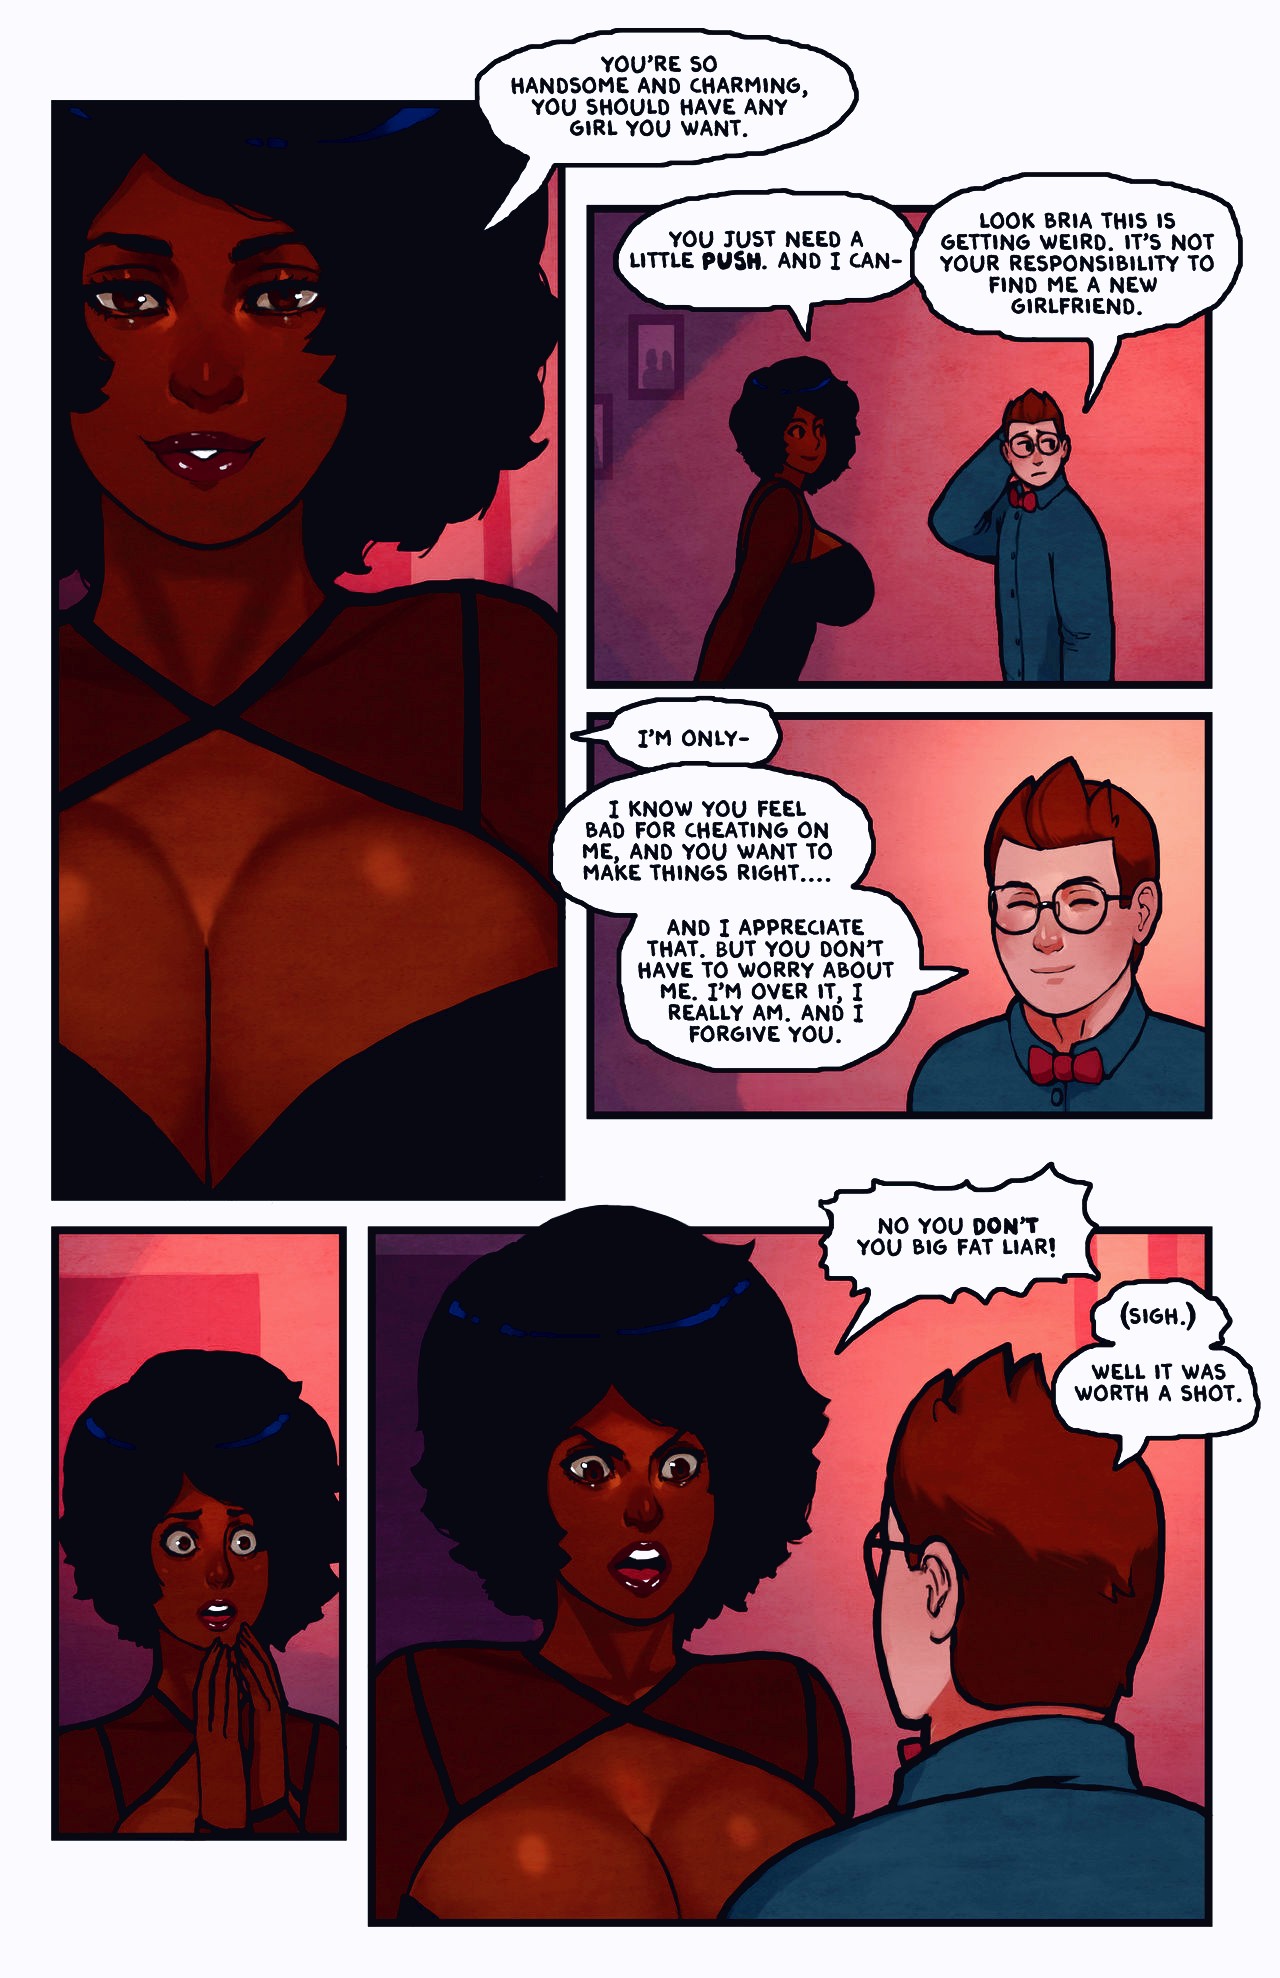 This Romantic World page 084